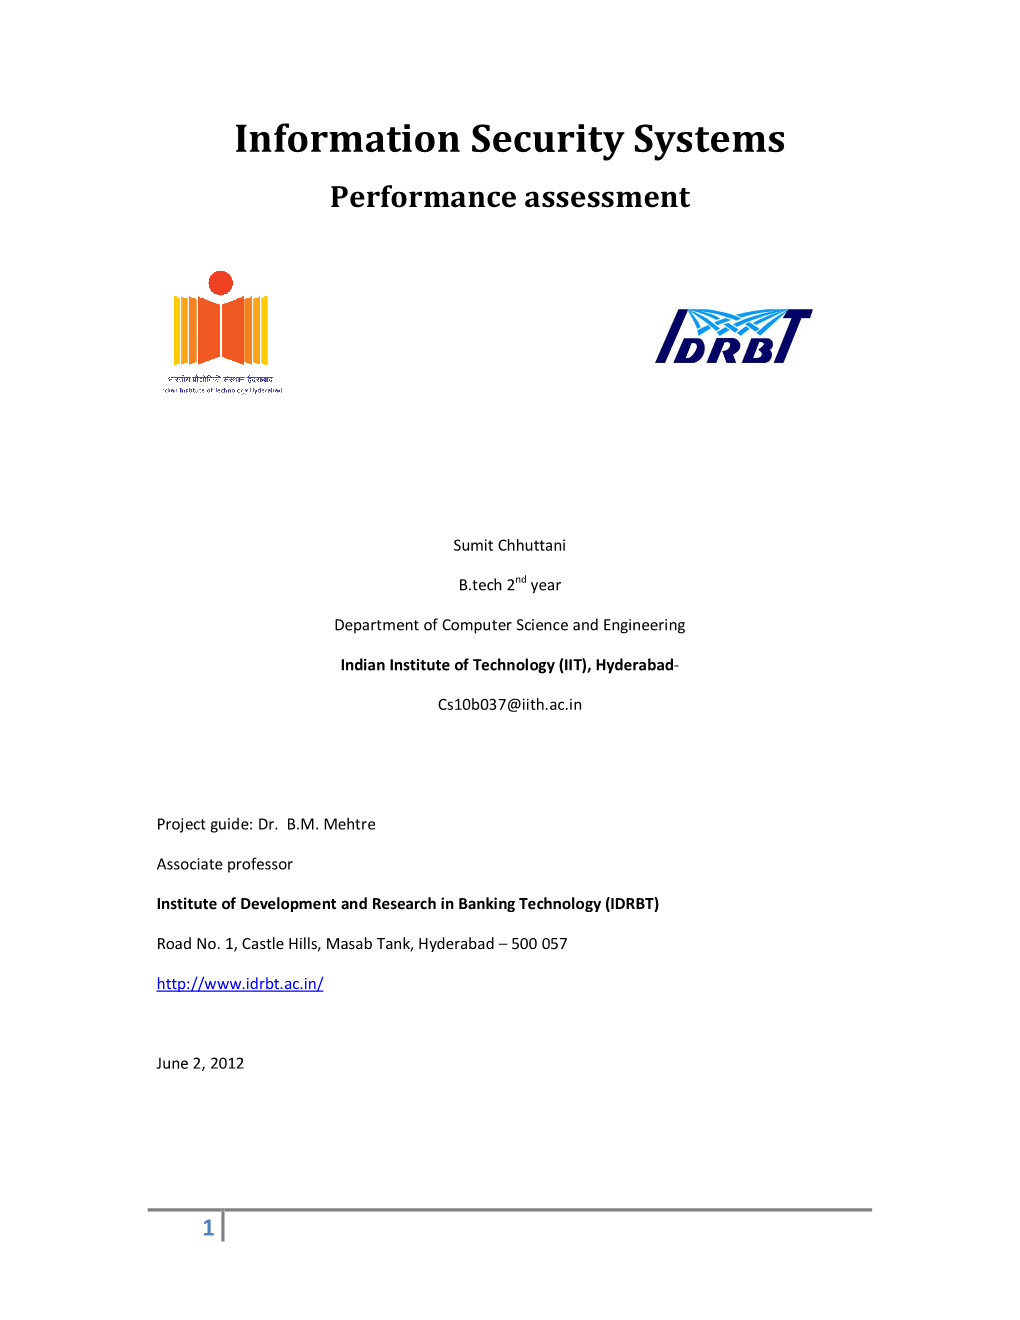 Information Security Systems Performance Assessment